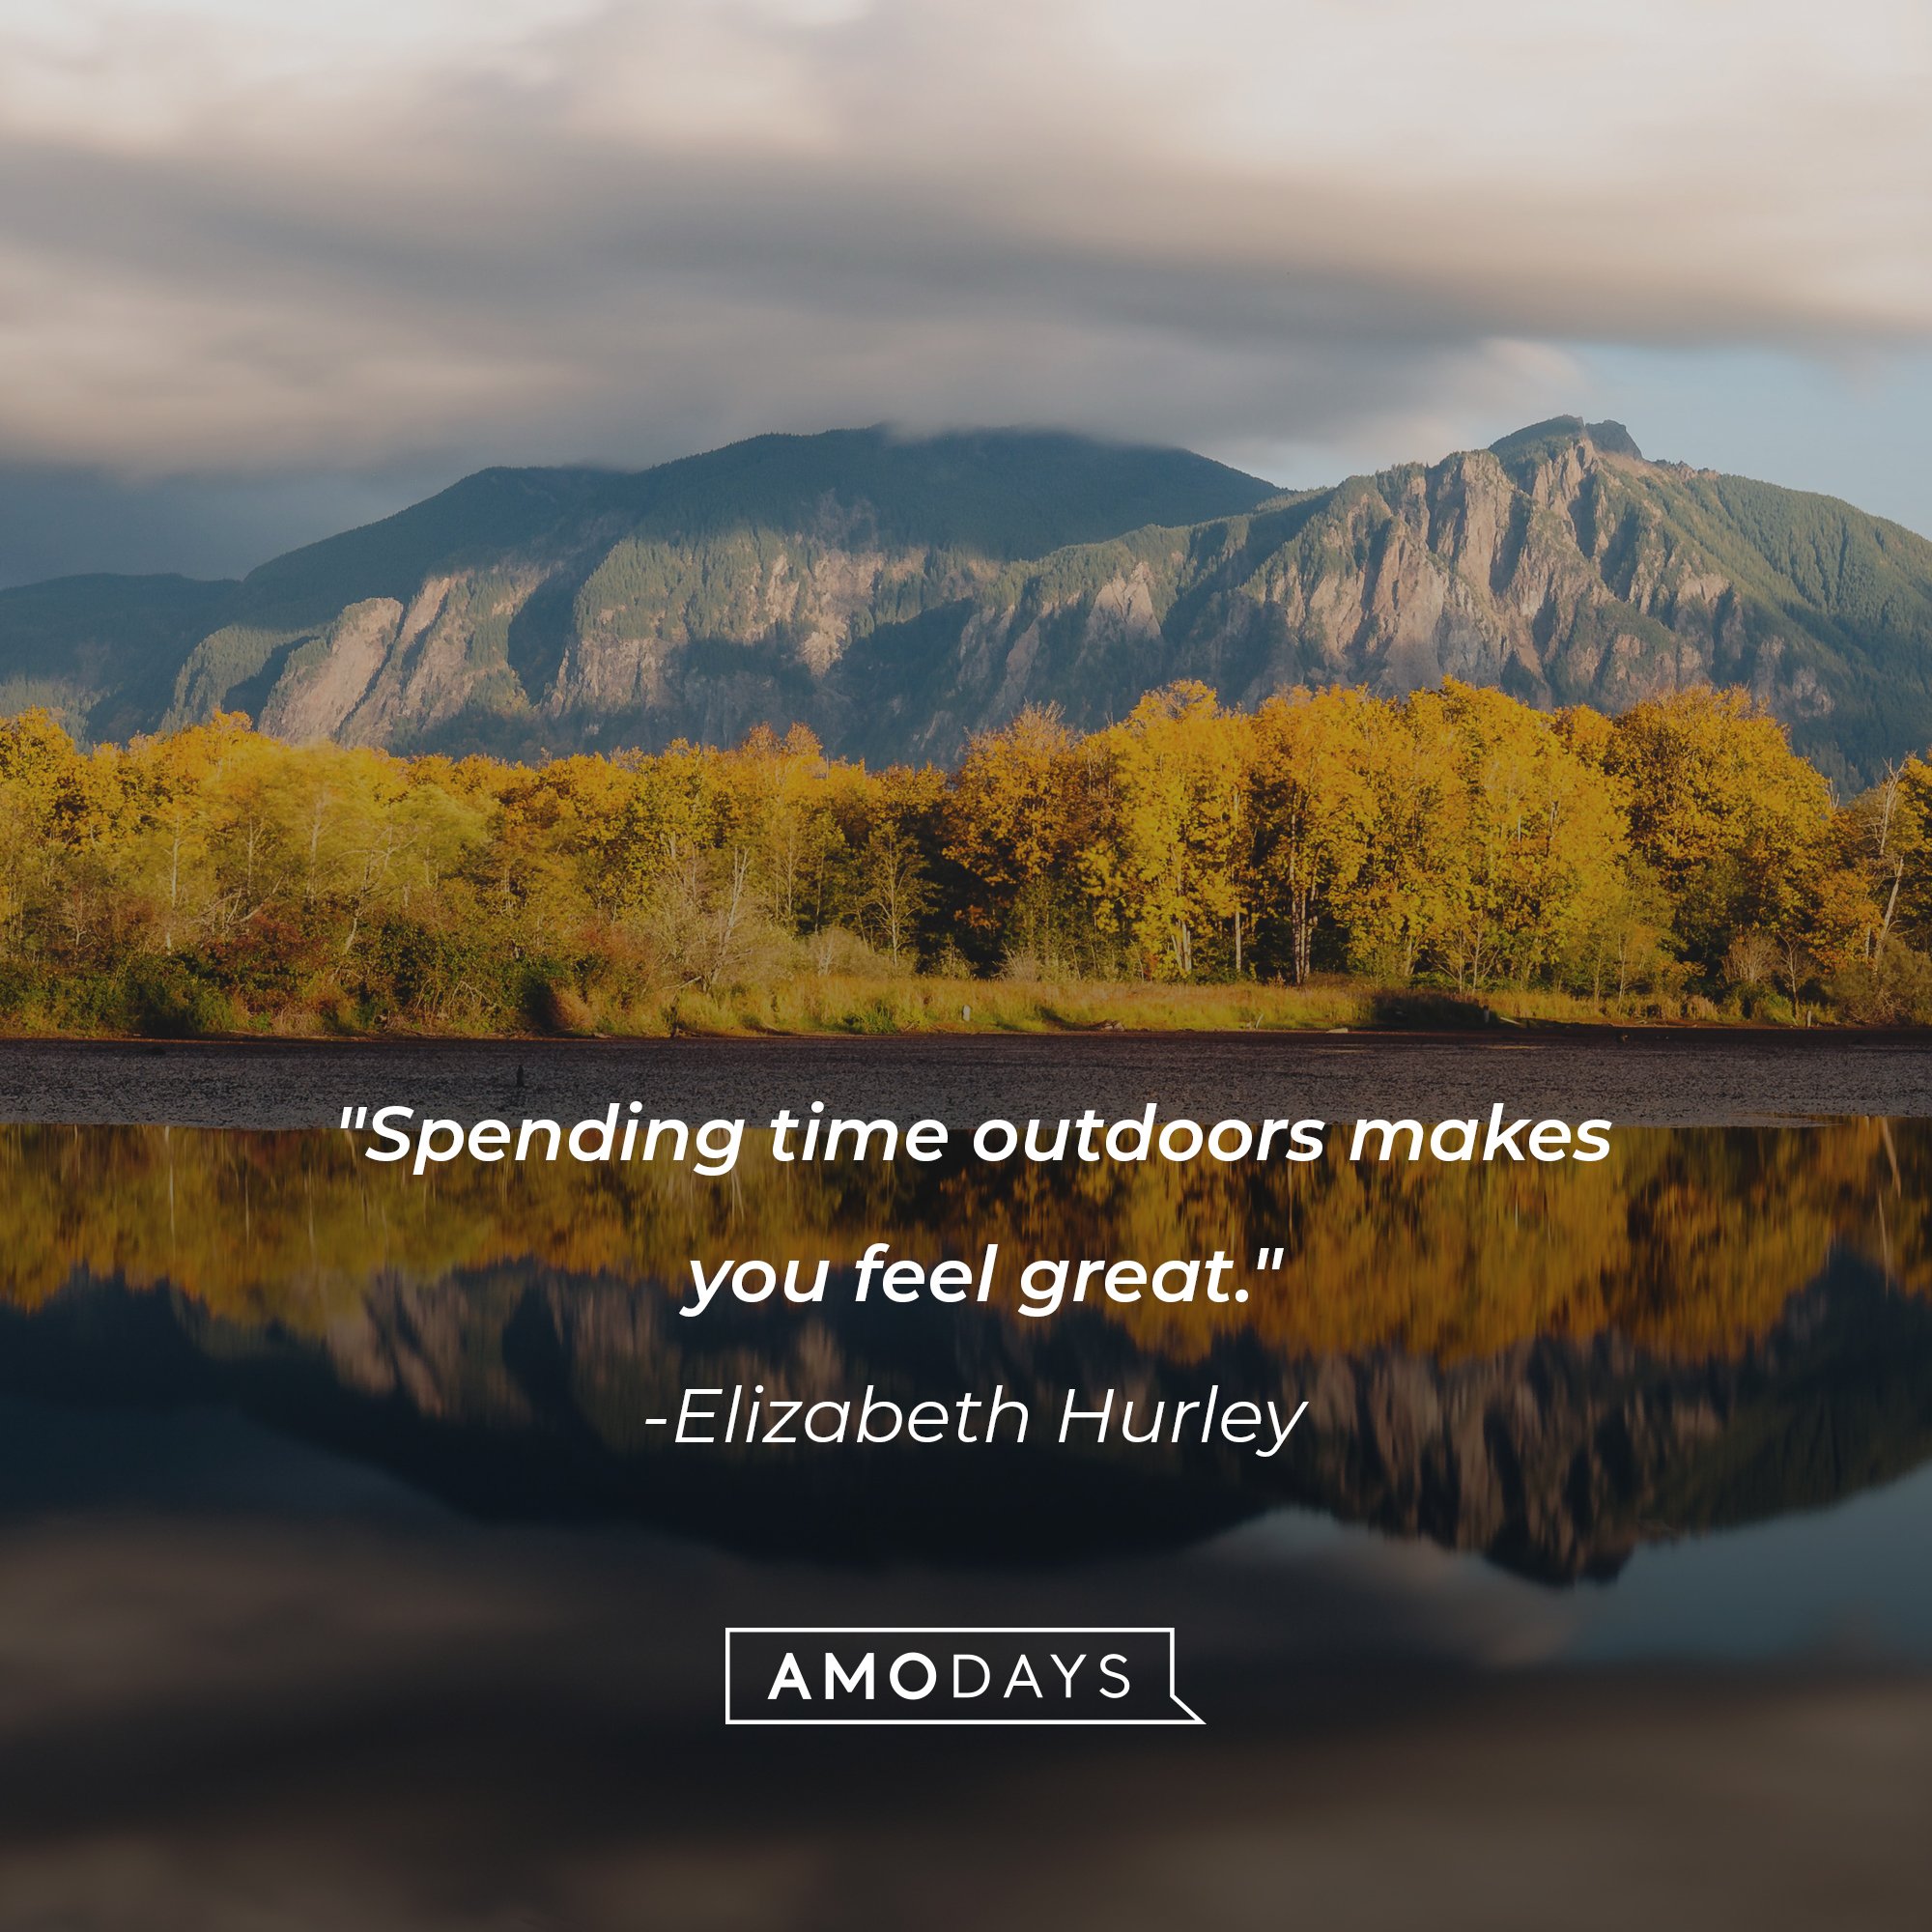 Elizabeth Hurley's quote: "Spending time outdoors makes you feel great." | Image: AmoDays